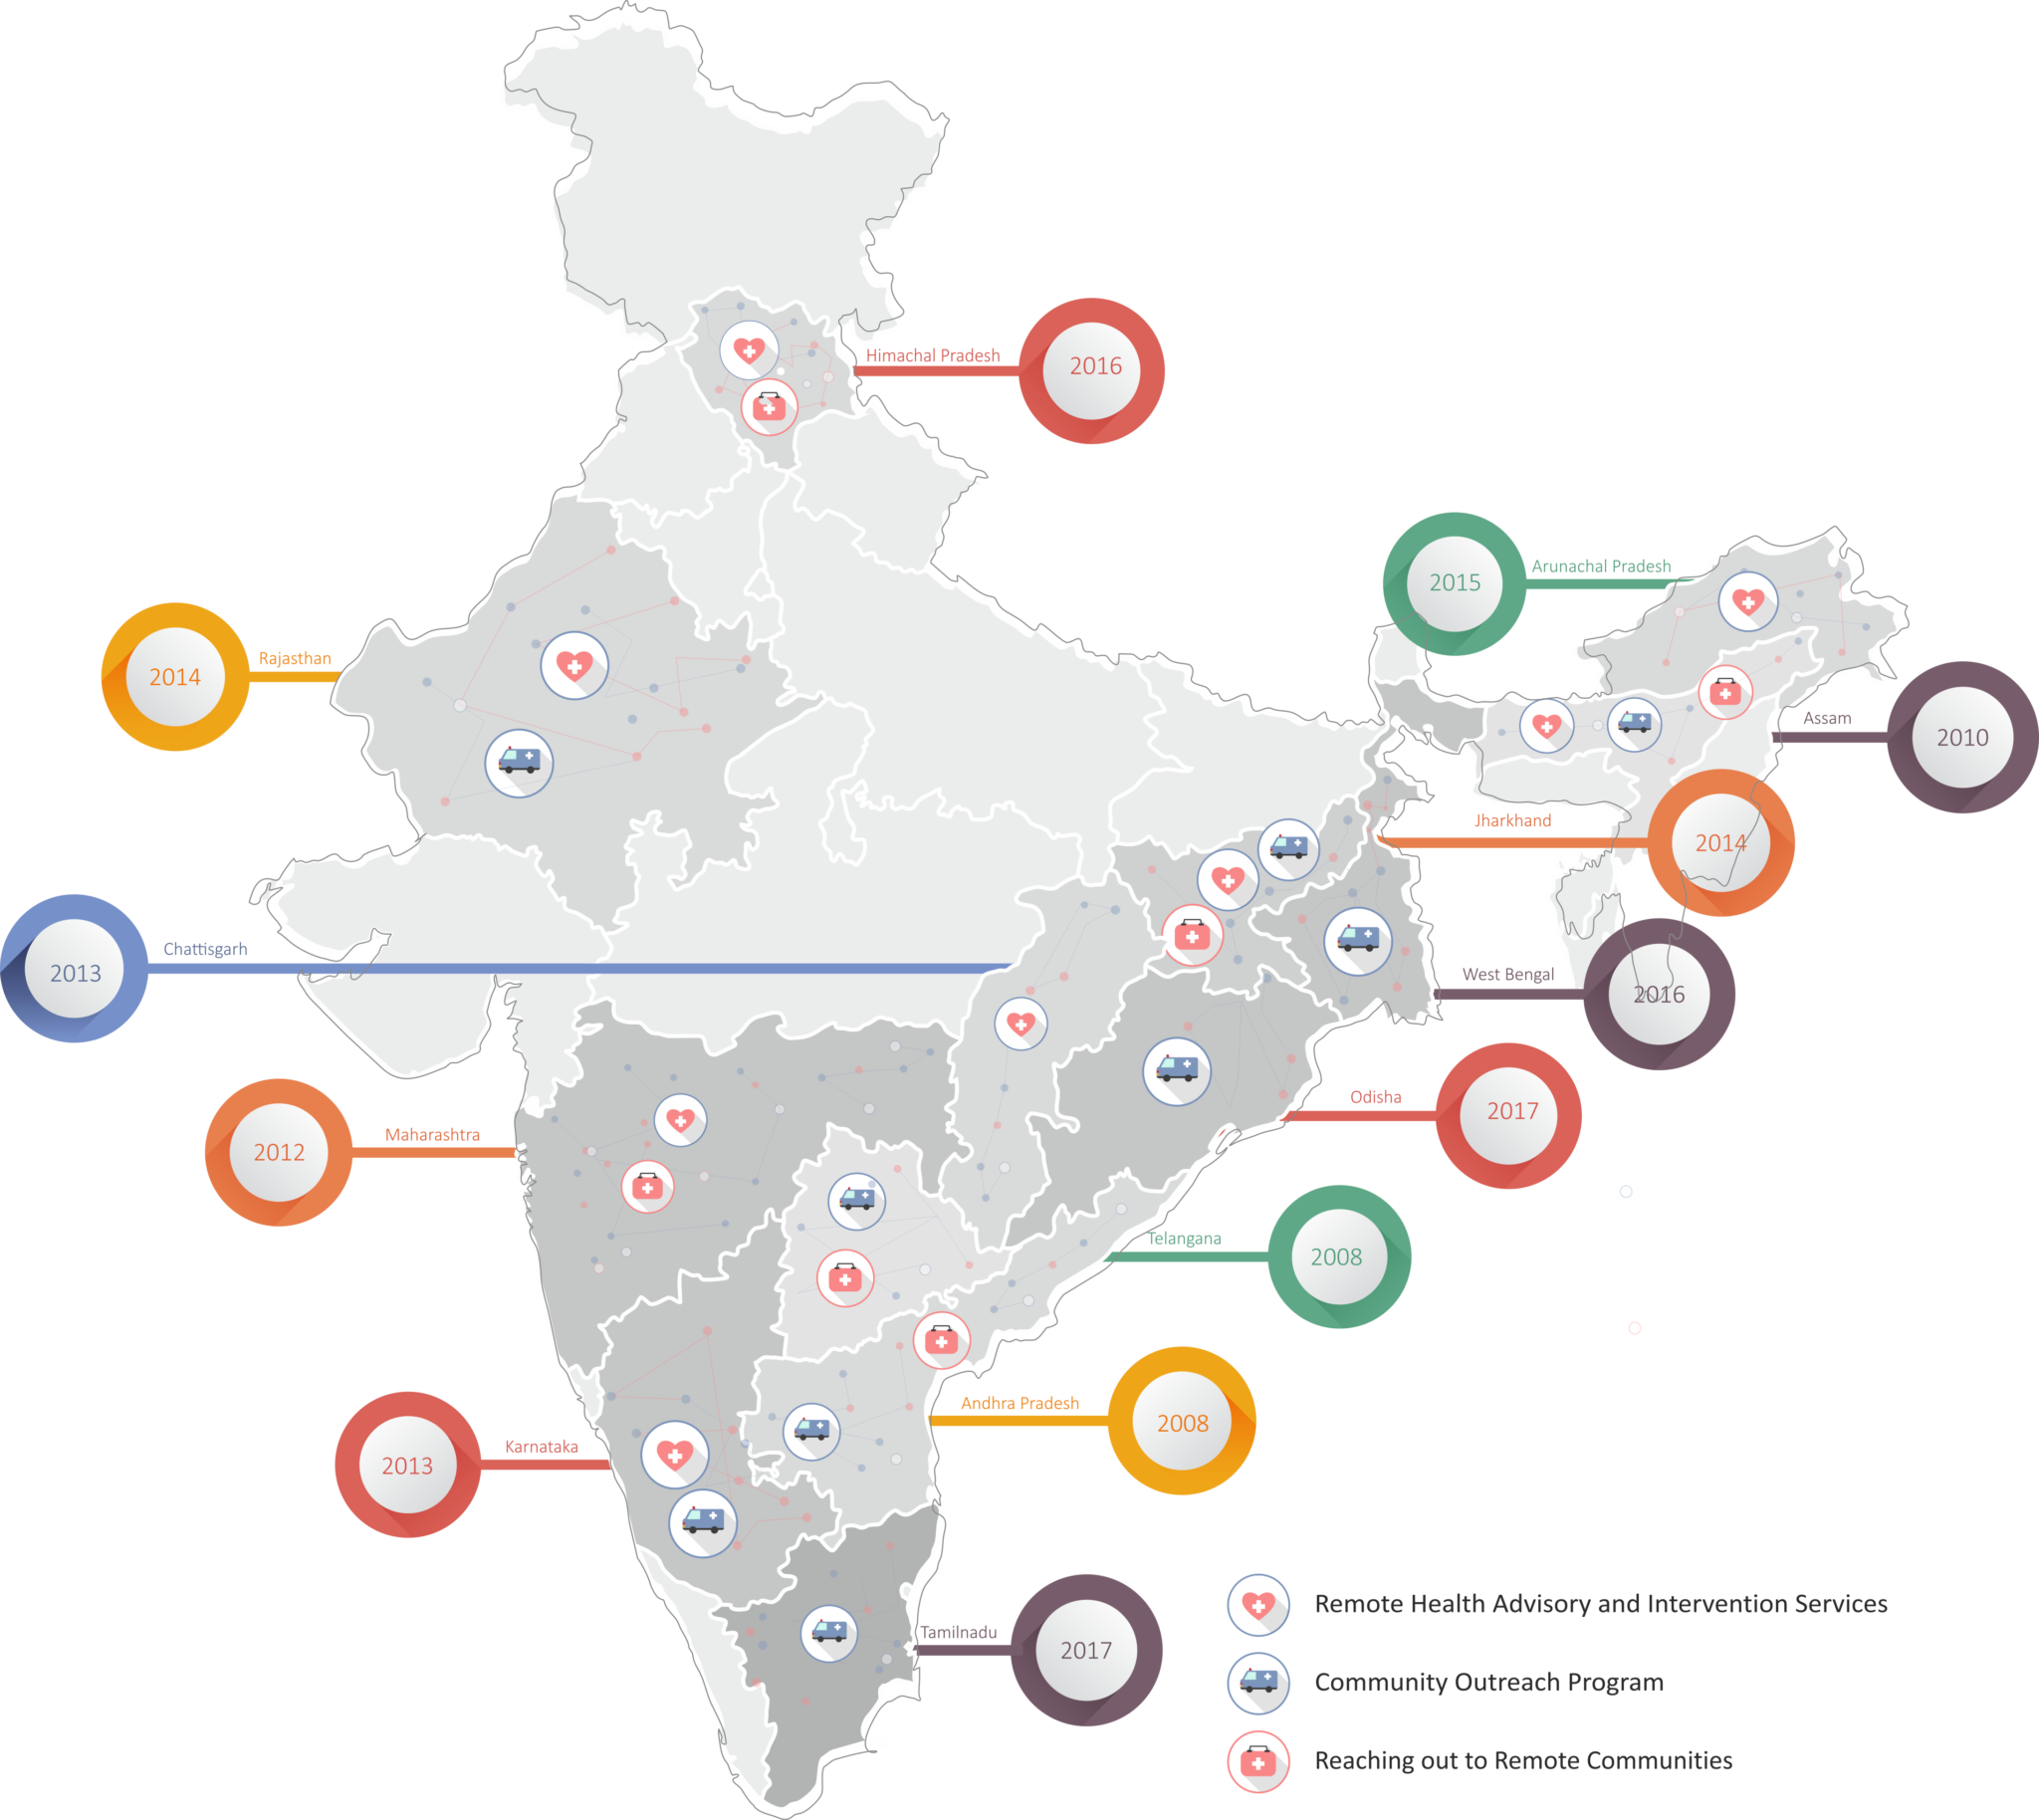 India Healthcare Intervention Map2017